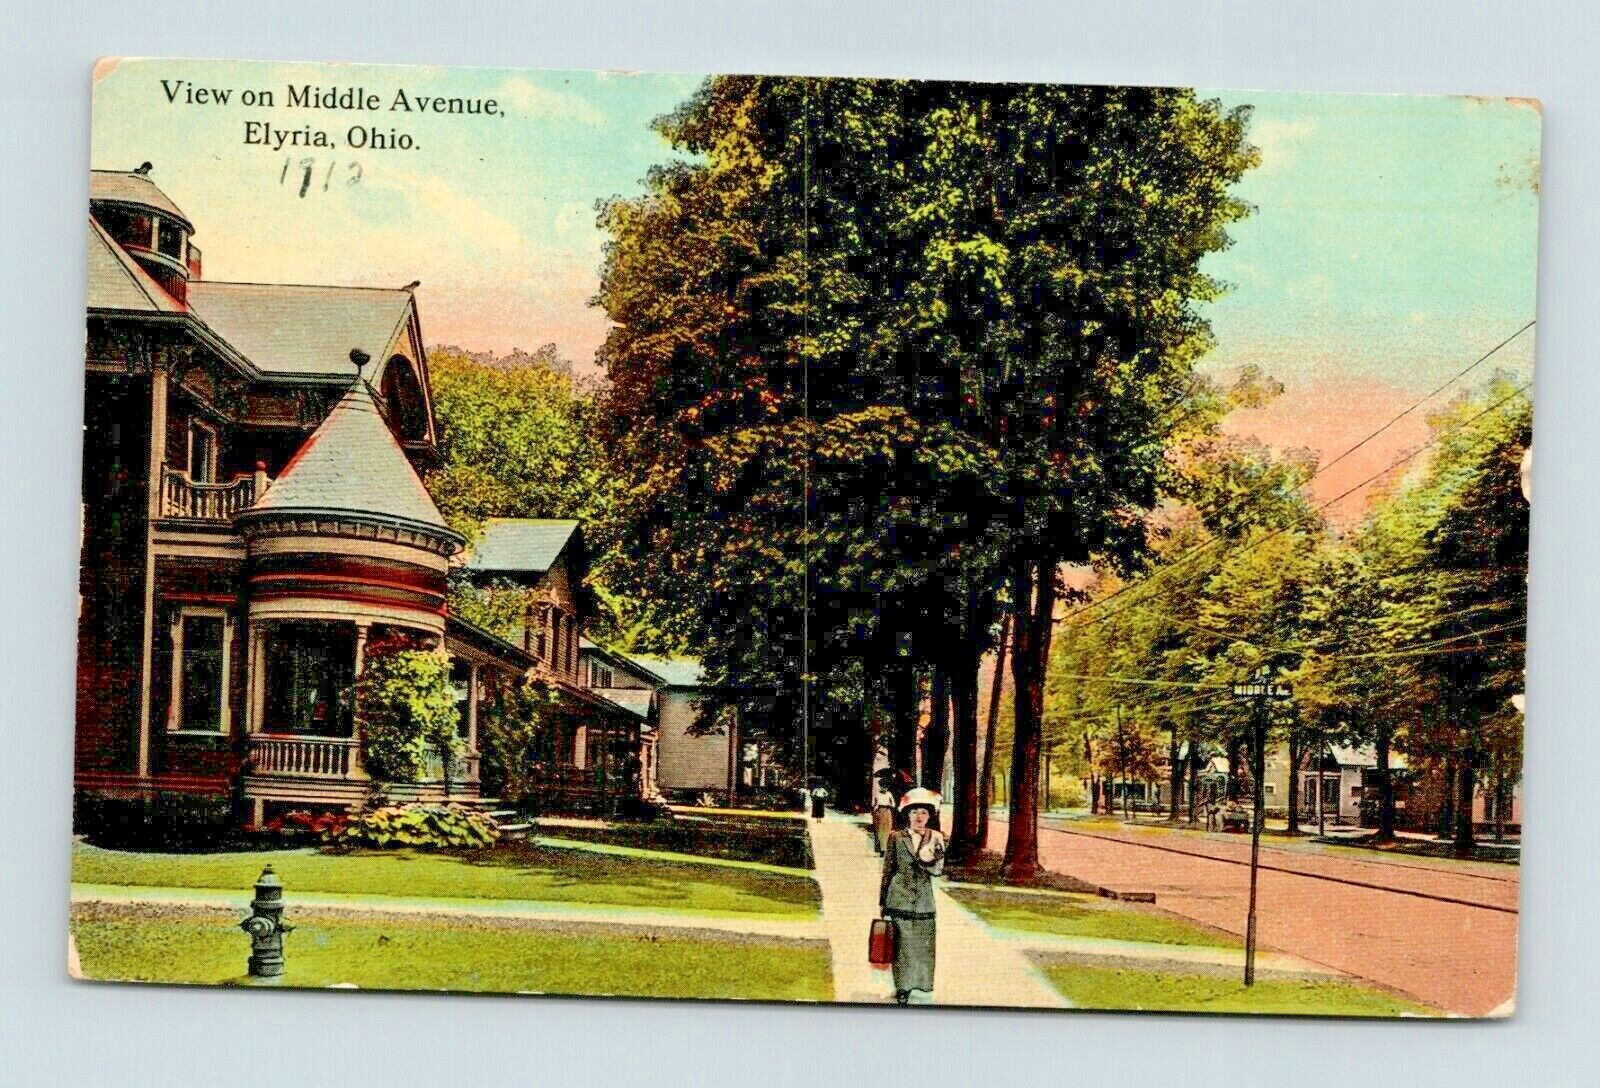 ELYRIA OH OHIO NICE OLD VIEW ON MIDDLE AVENUE OF OLD HOMES POSTCARD B-13-2